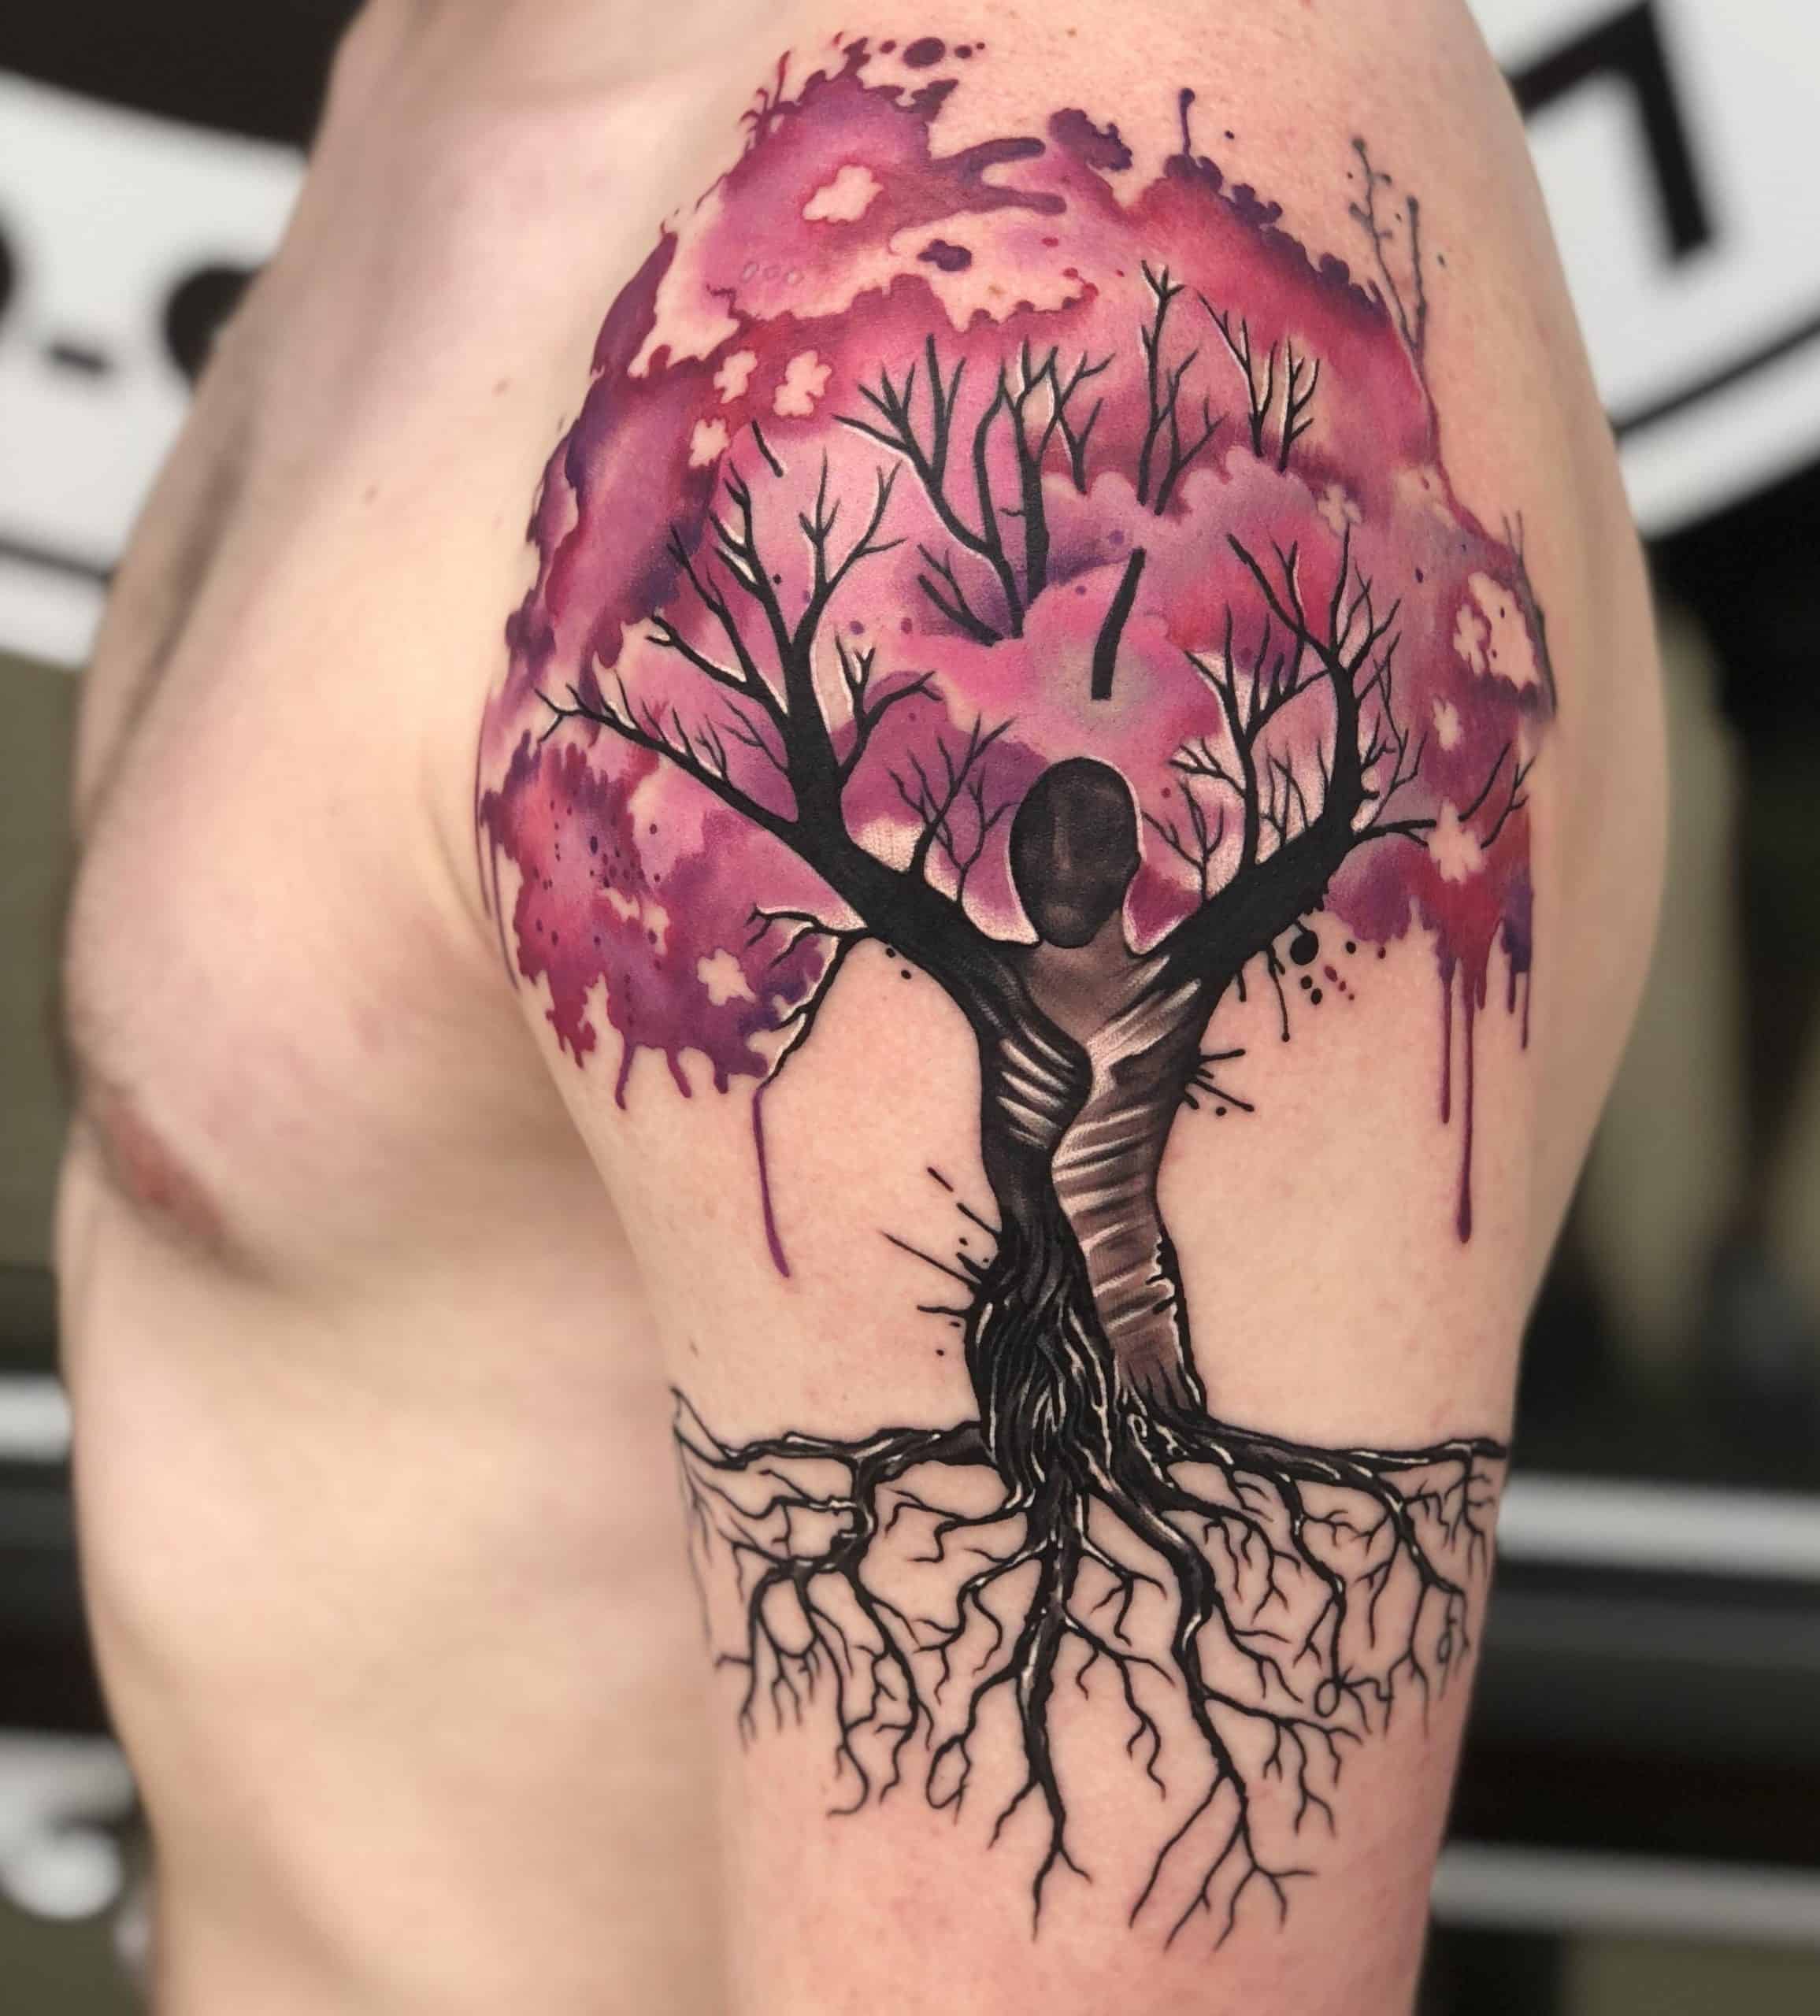 30+ Dryad Tattoos: Origins, Meanings, Common Themes & More.